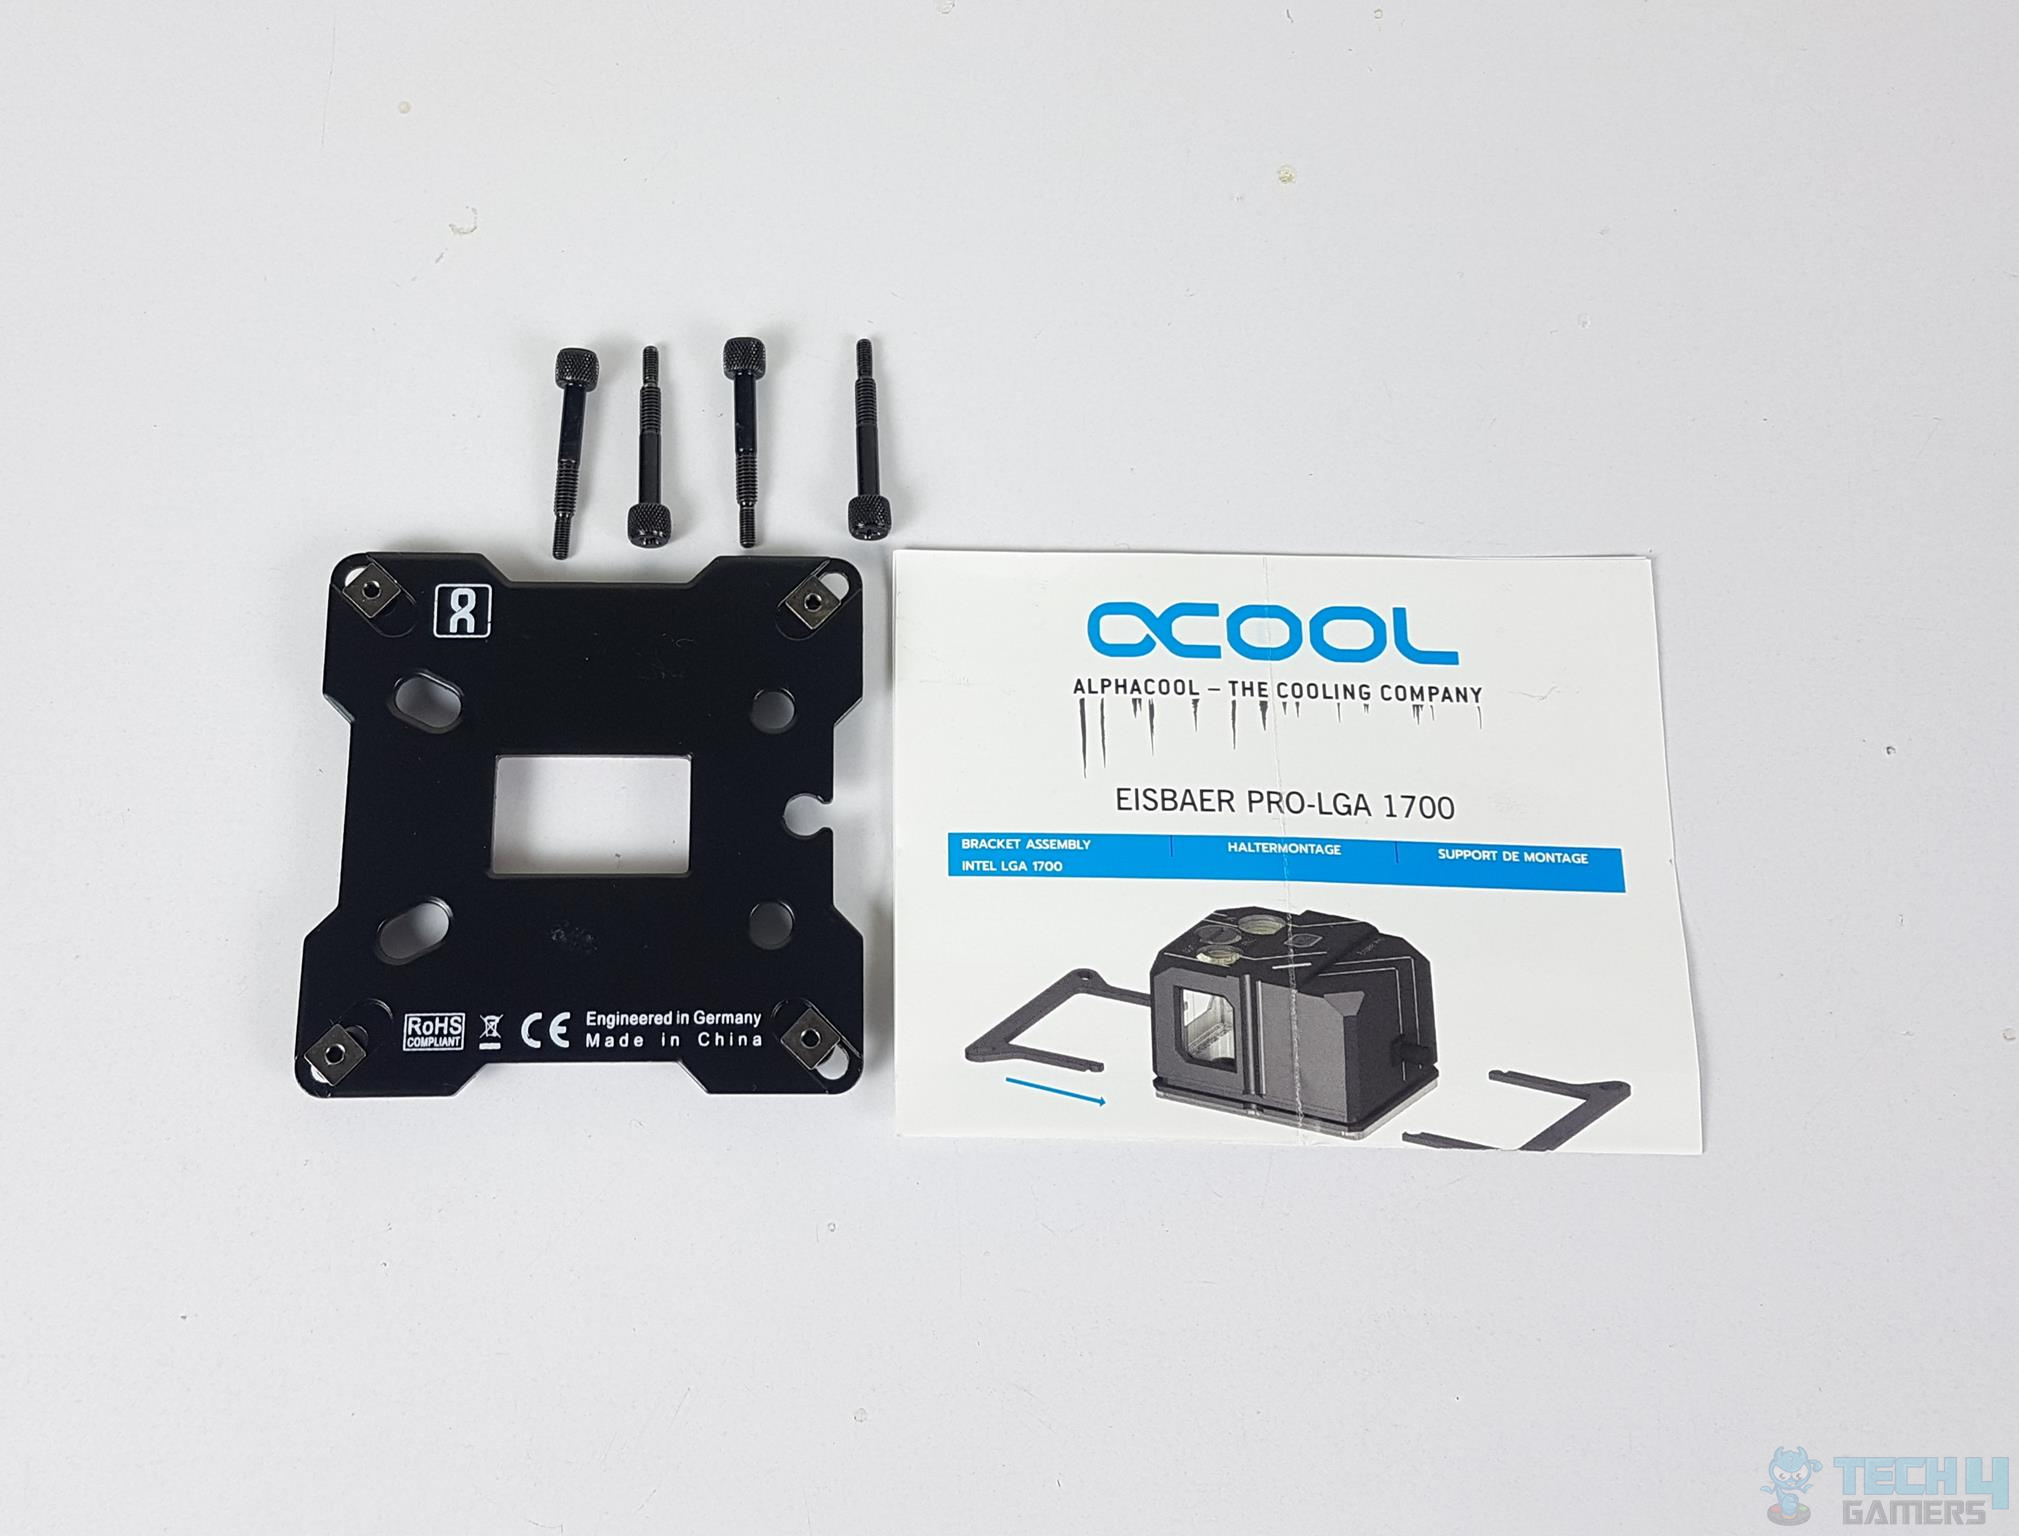 ALPHACOOL Eisbaer Pro HPE Aurora 360 AIO — Metallic backplate, long screws/pillars, and the user guide